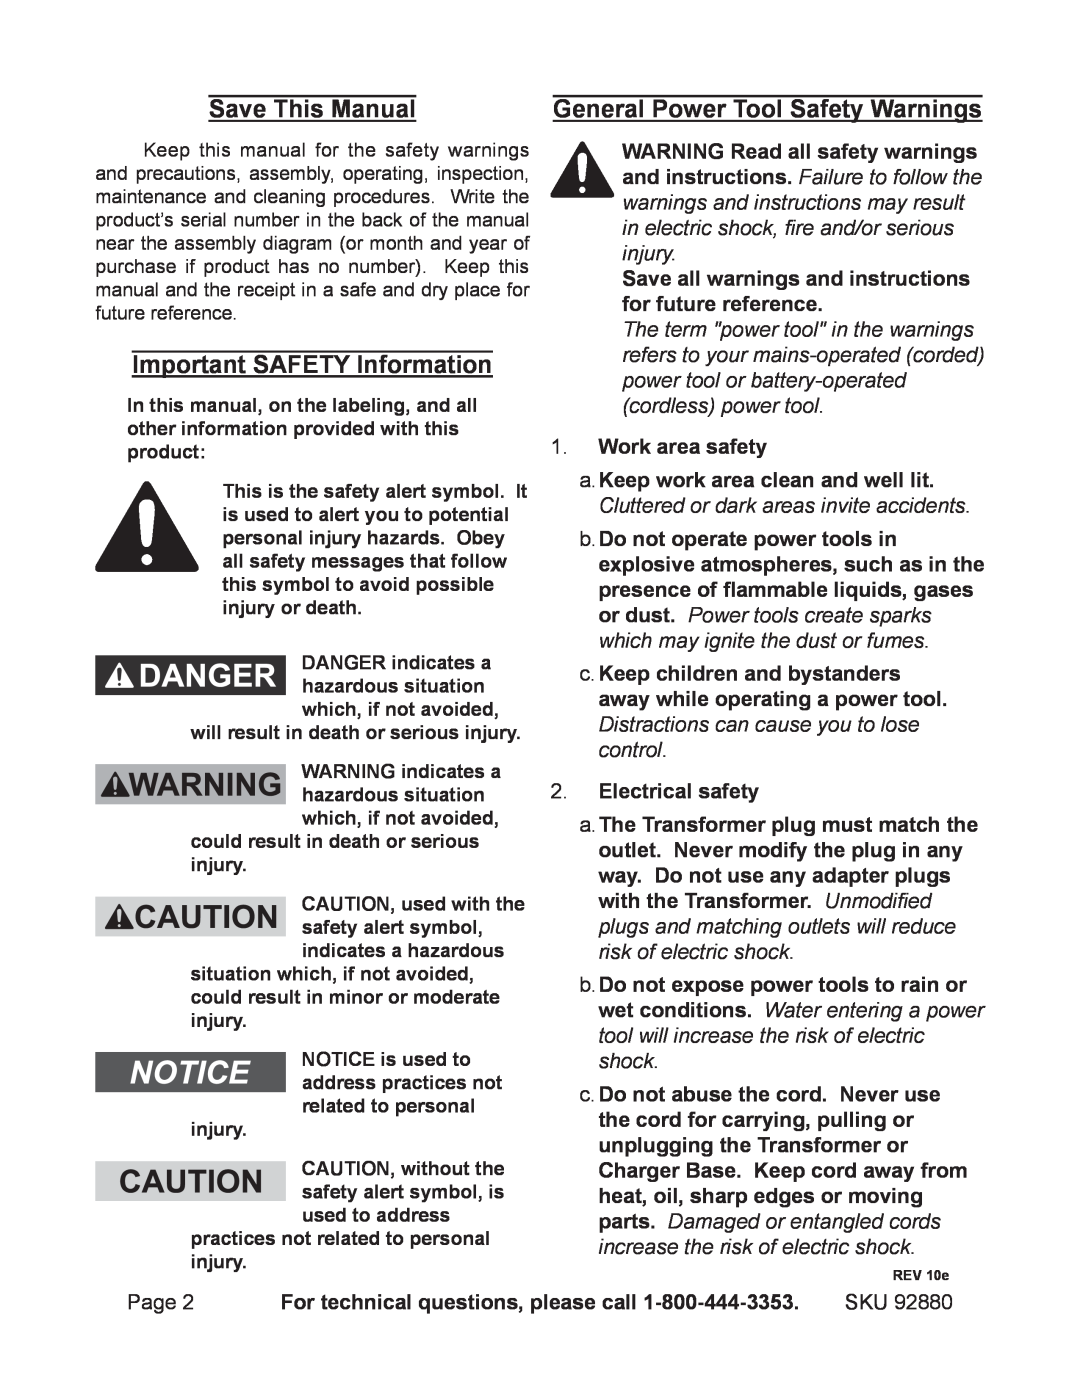 Chicago Electric 92880 Save This Manual, Important SAFETY Information, General Power Tool Safety Warnings 